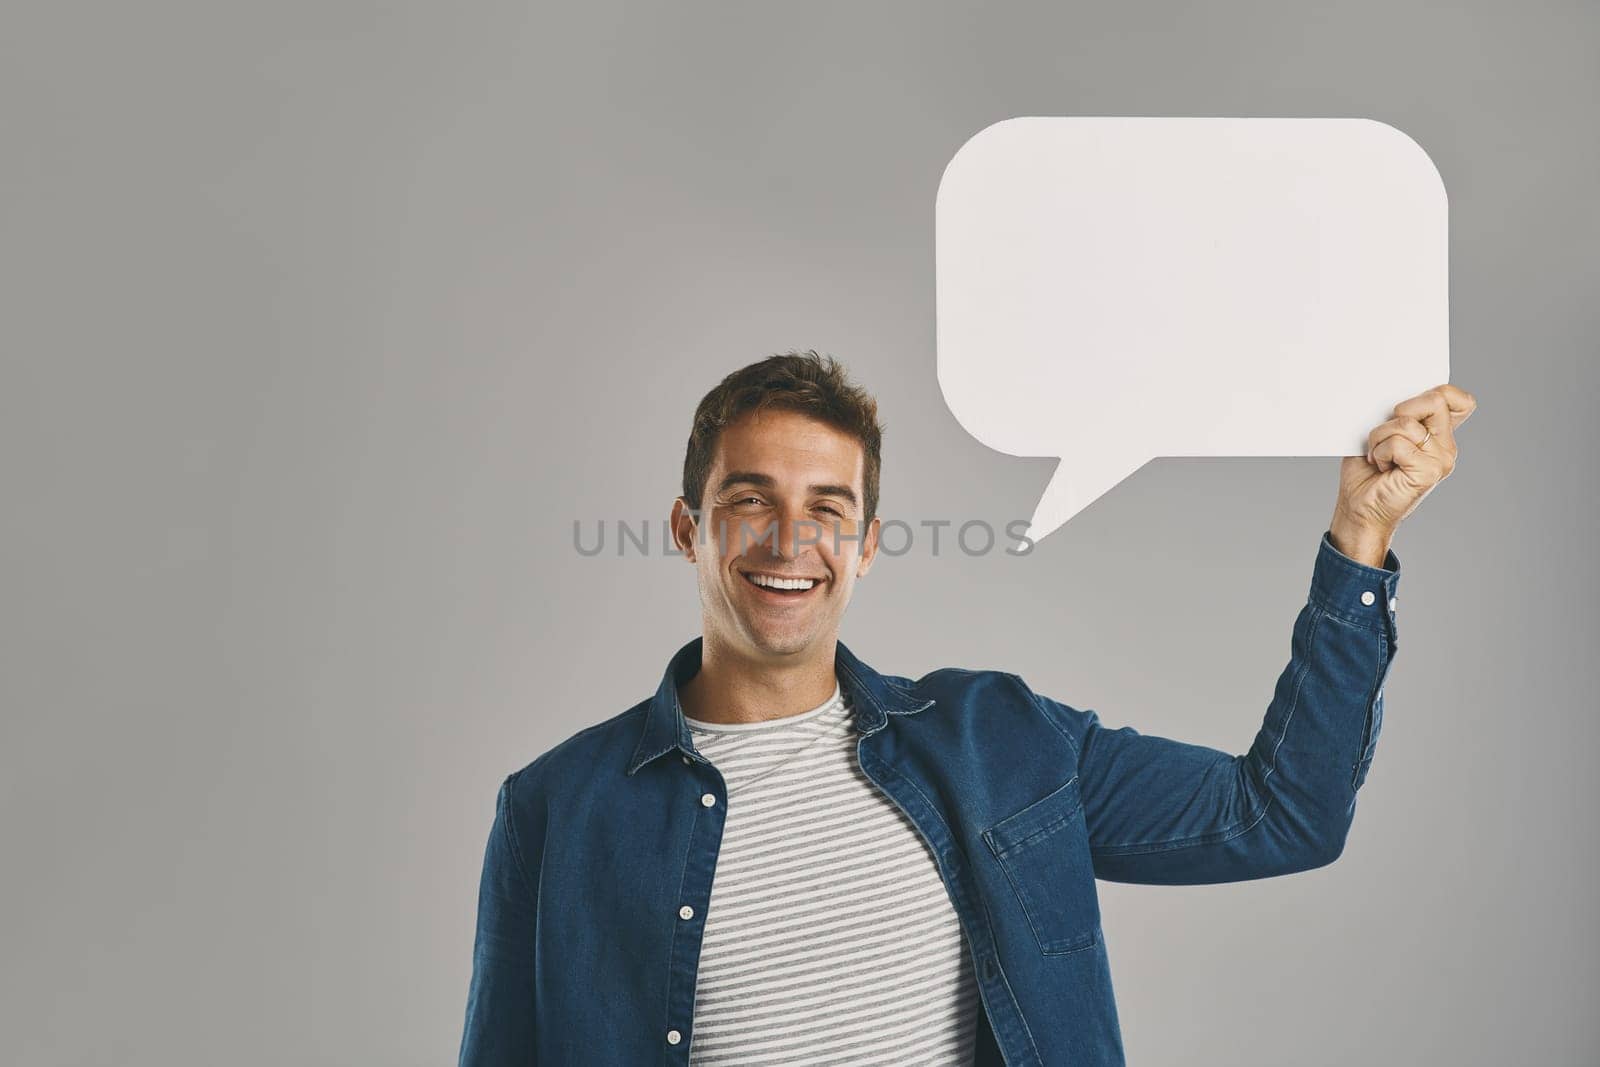 Speak your mind. Studio portrait of a young man holding a speech bubble against a grey background